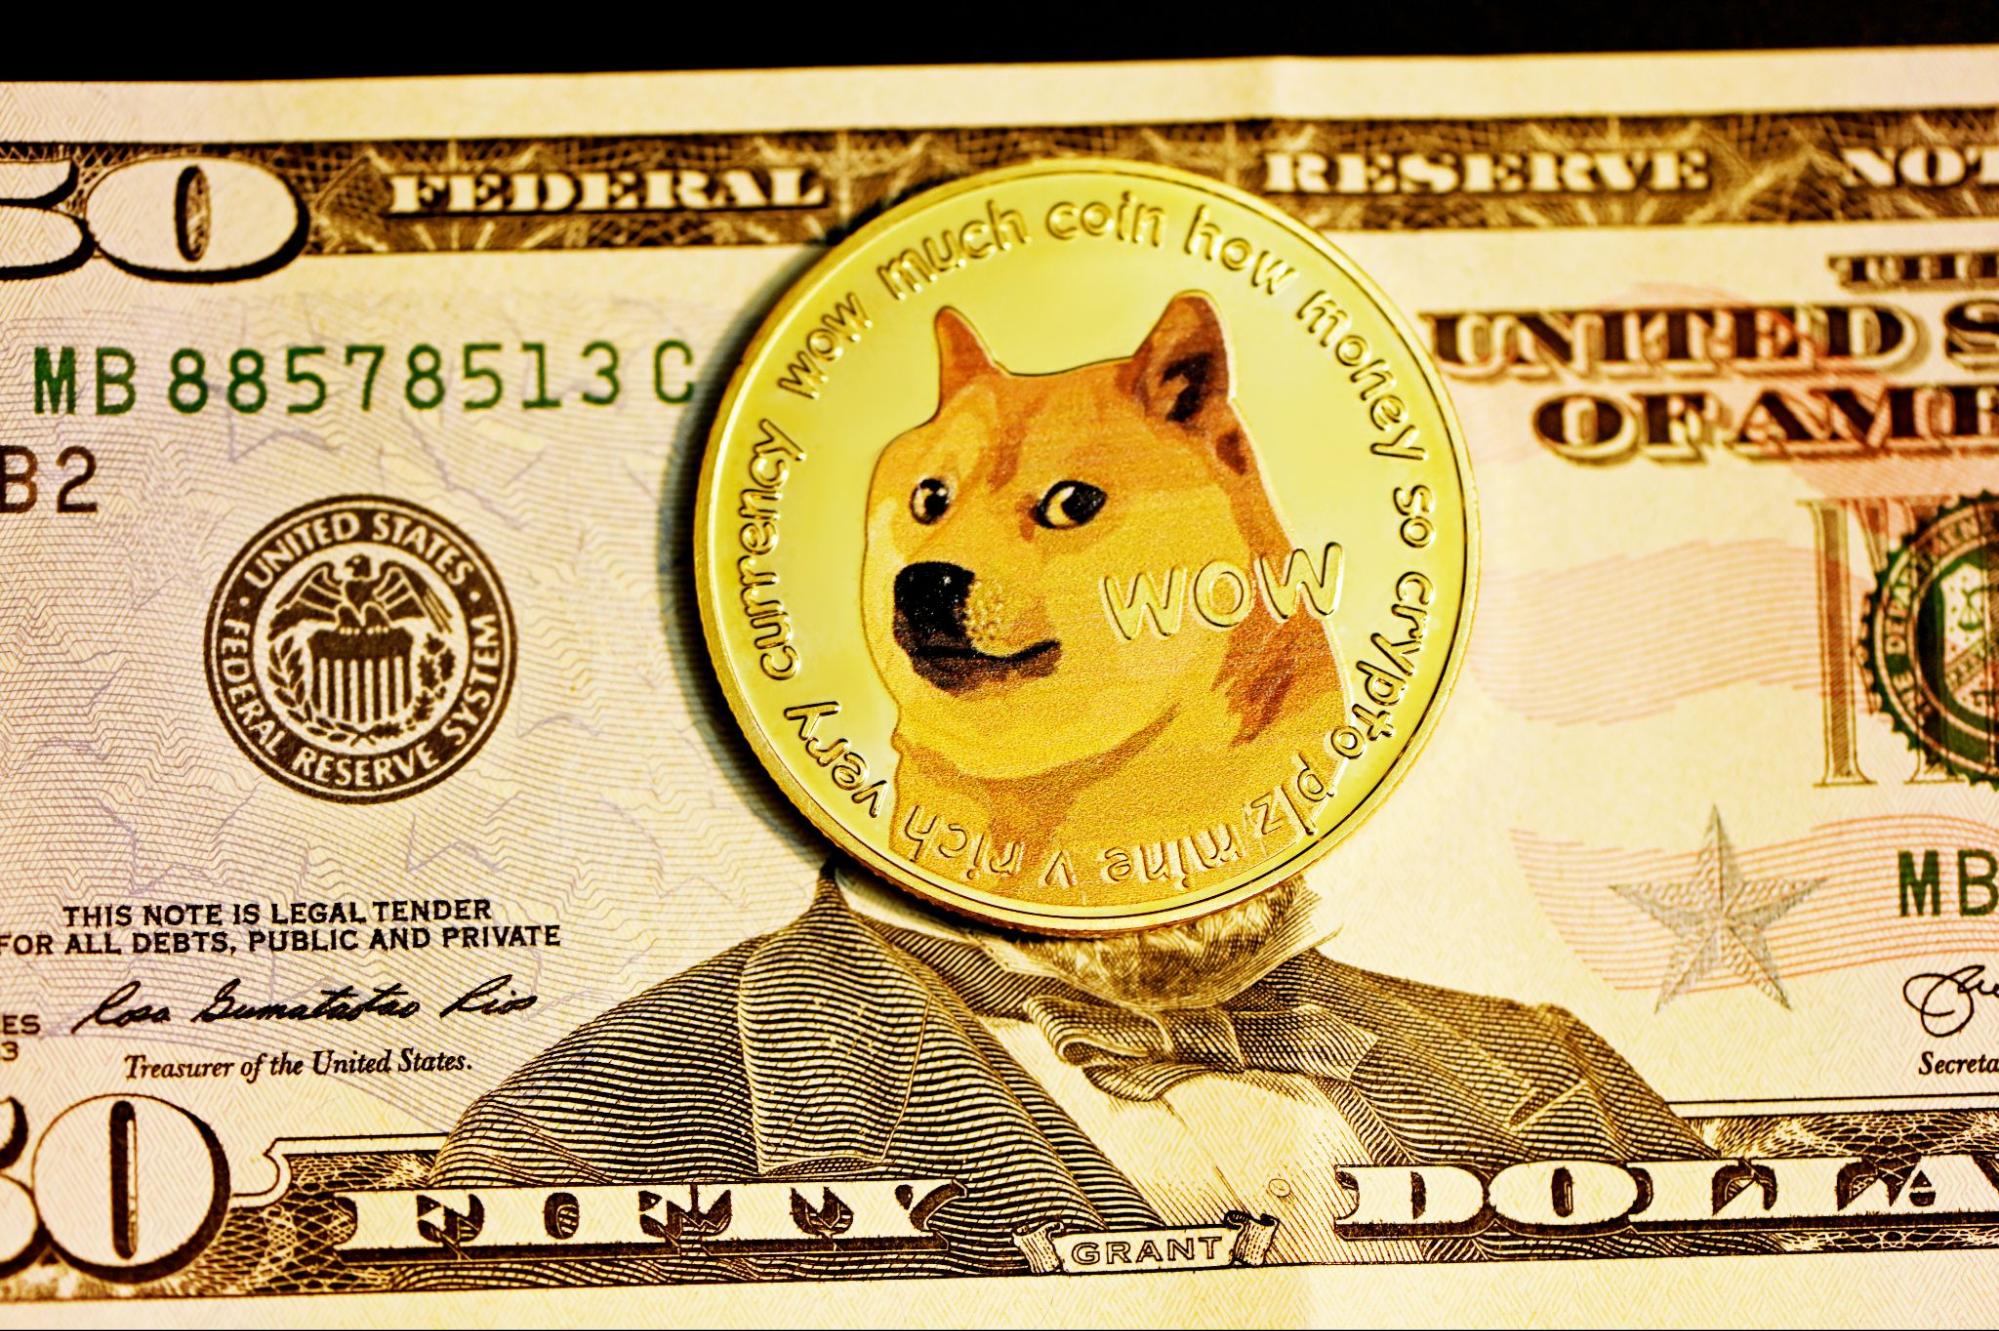 history of monetary systems dogecoin on top fifty dollar bill for decentral publishing